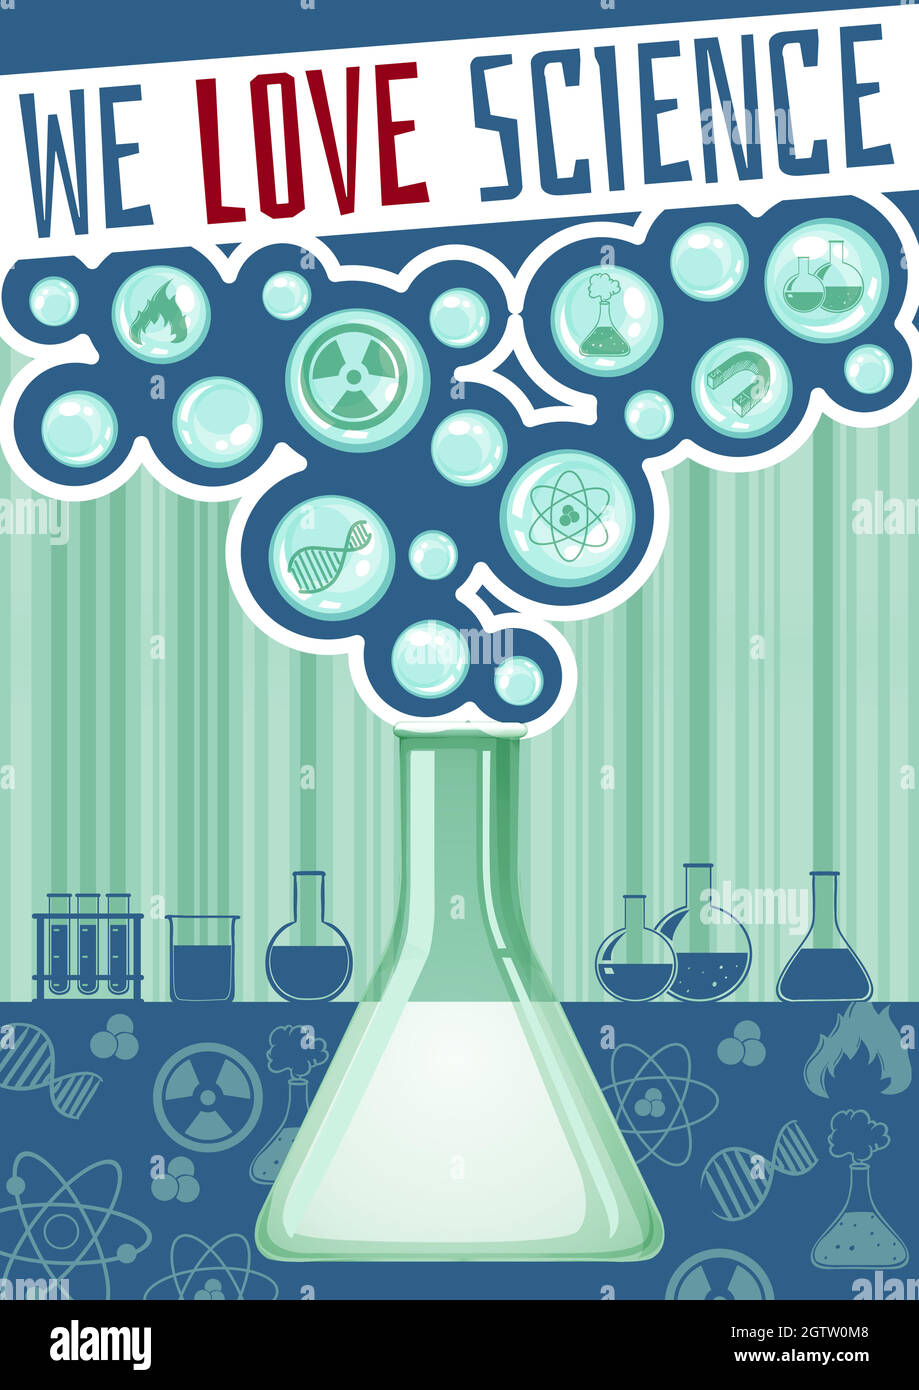 Science poster with lab equipment Stock Vector